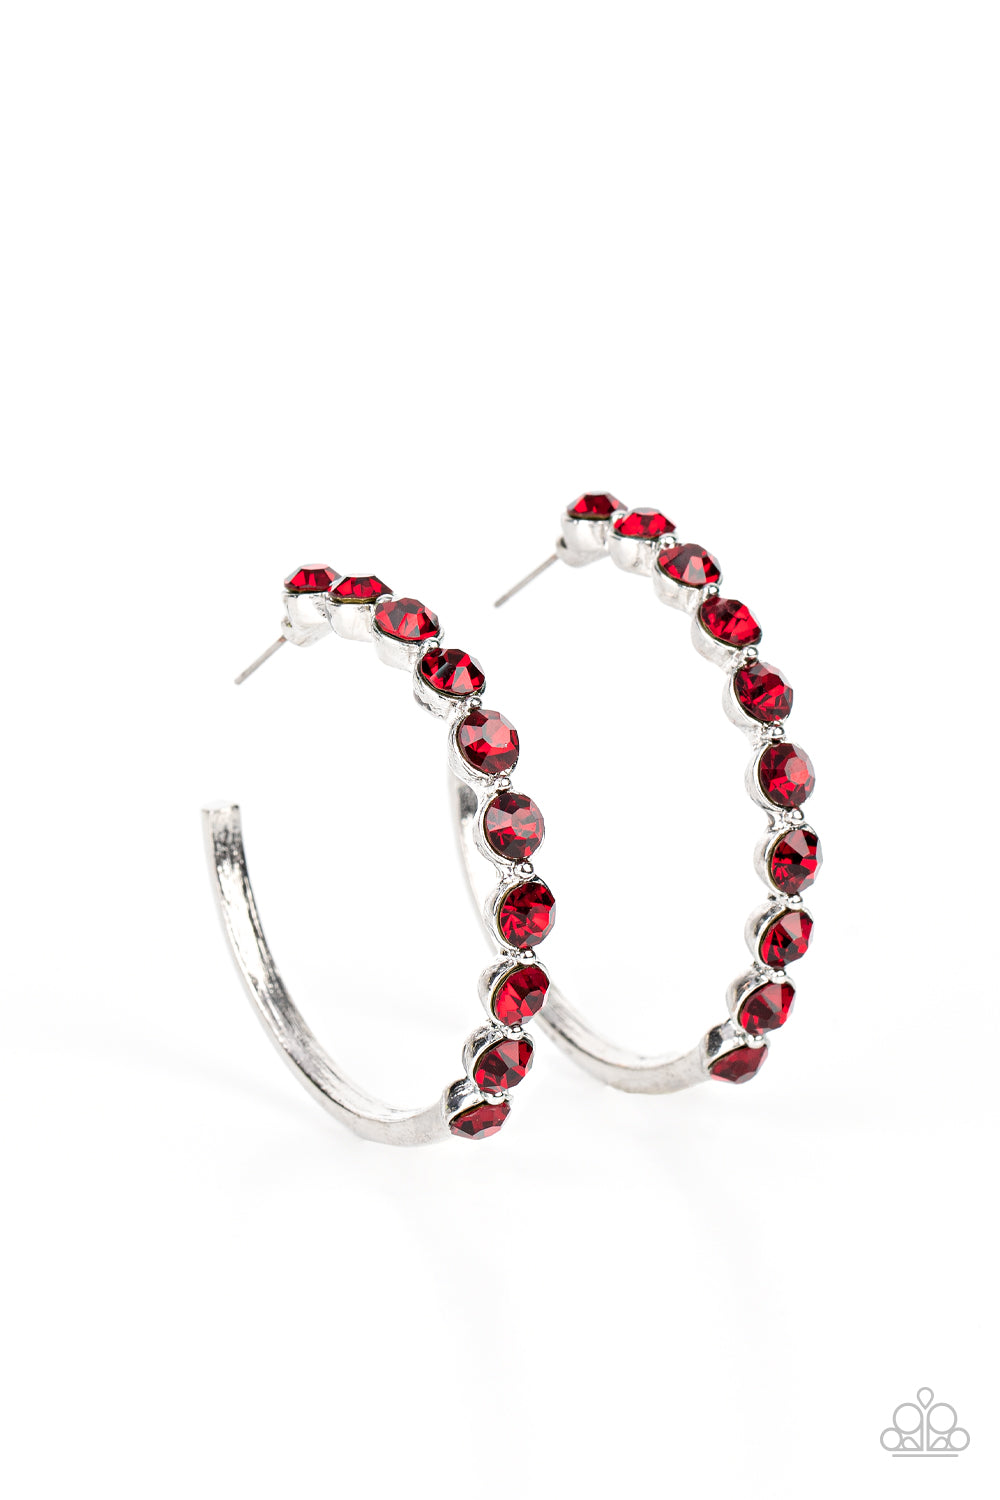 Photo Finish - Red Hoops - Paparazzi Accessories - Paparazzi Accessories 